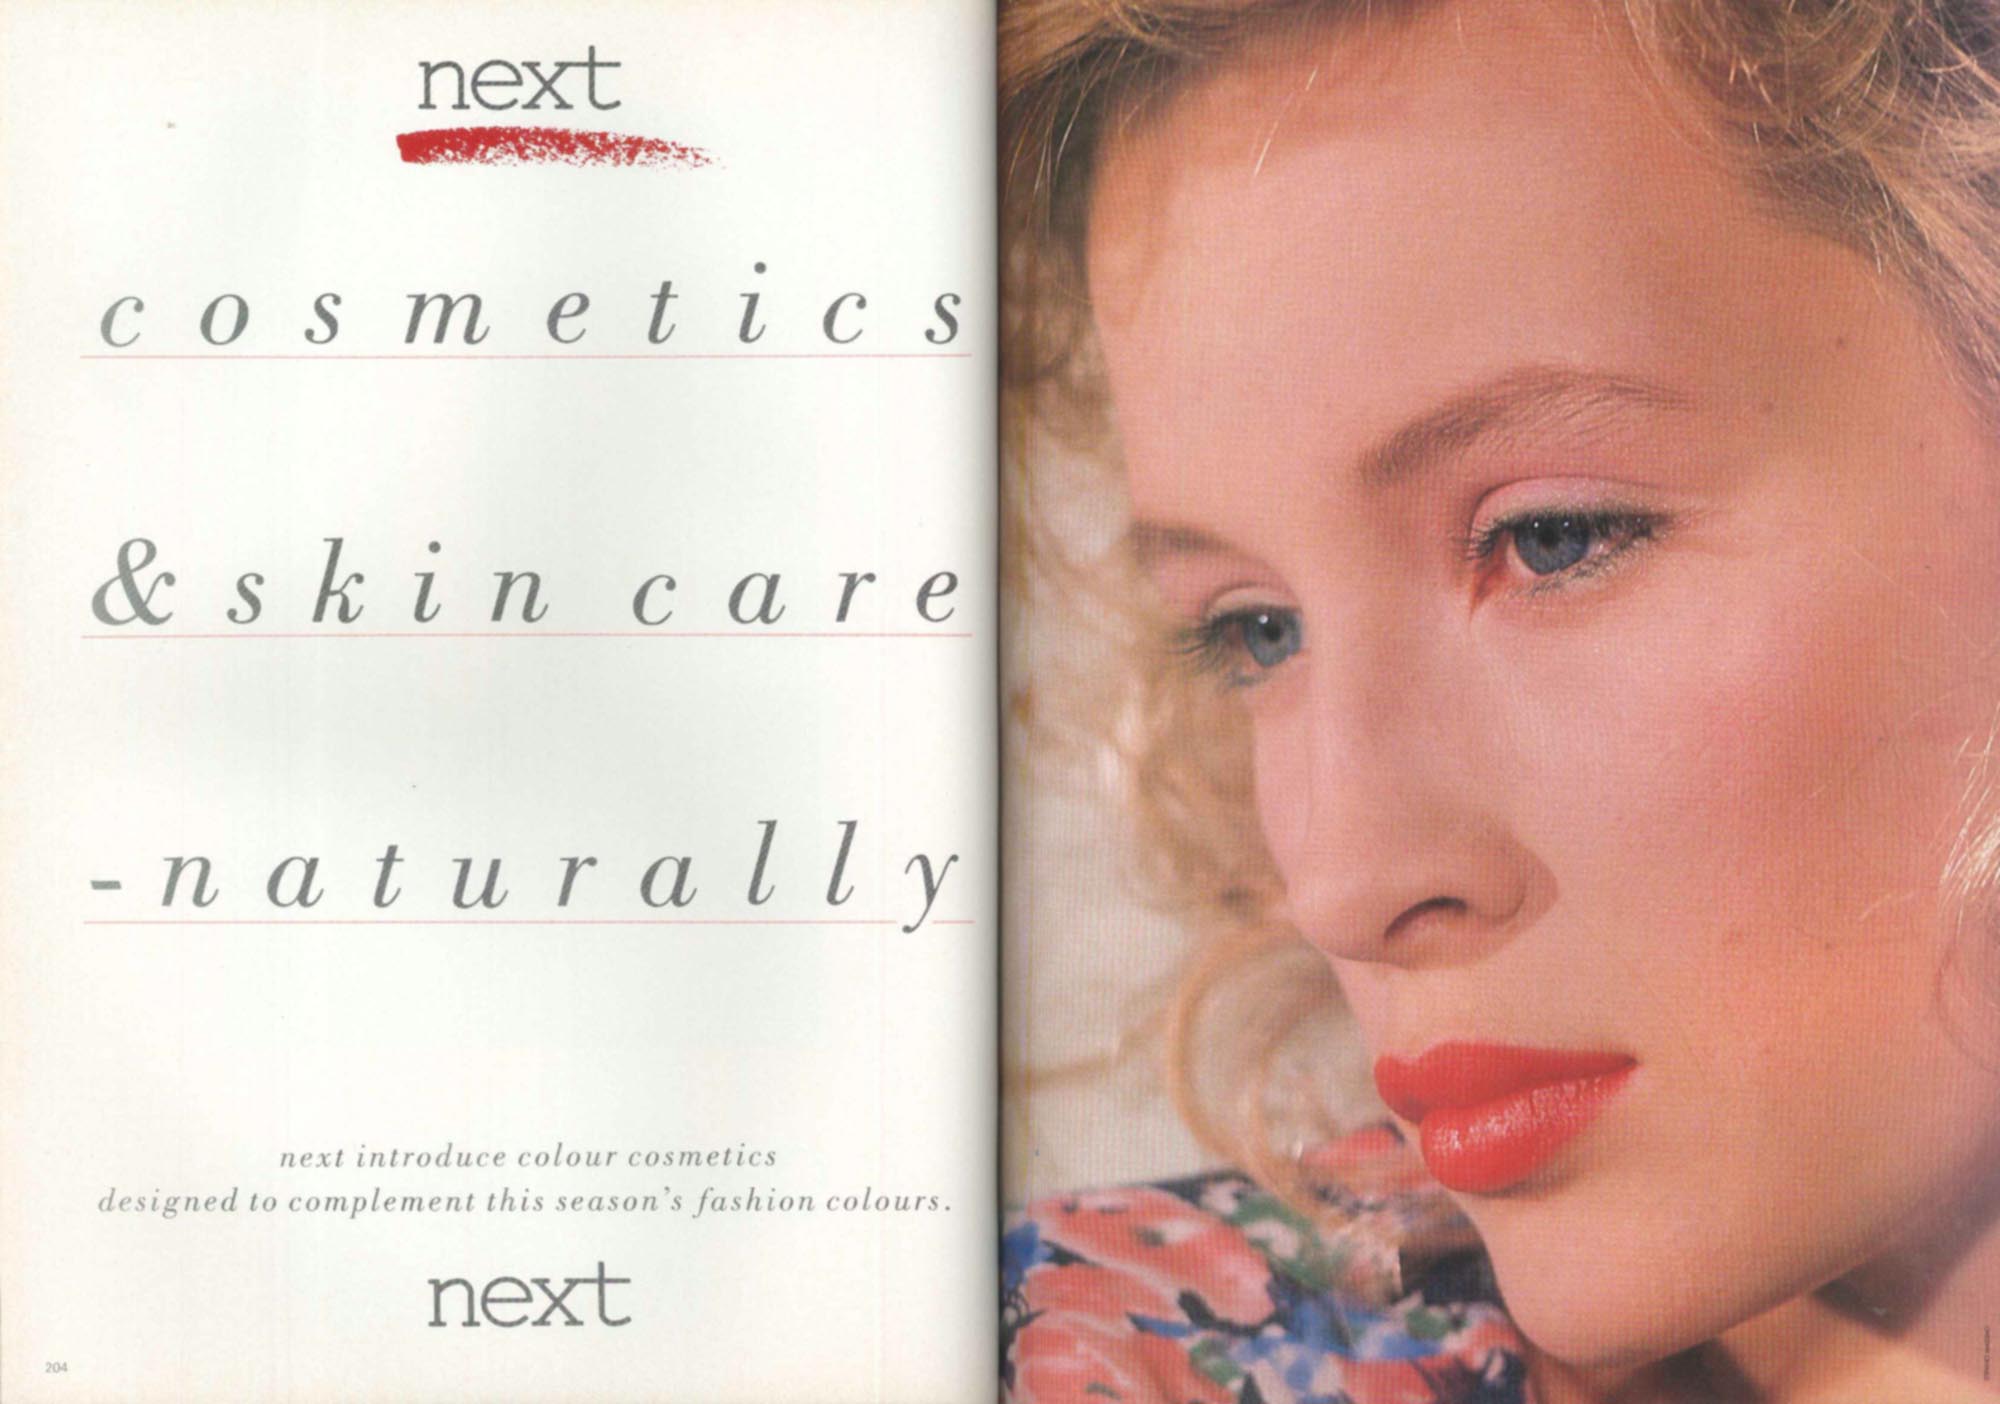 An advert for cosmetics by the Leicester company Next, 1986 - 